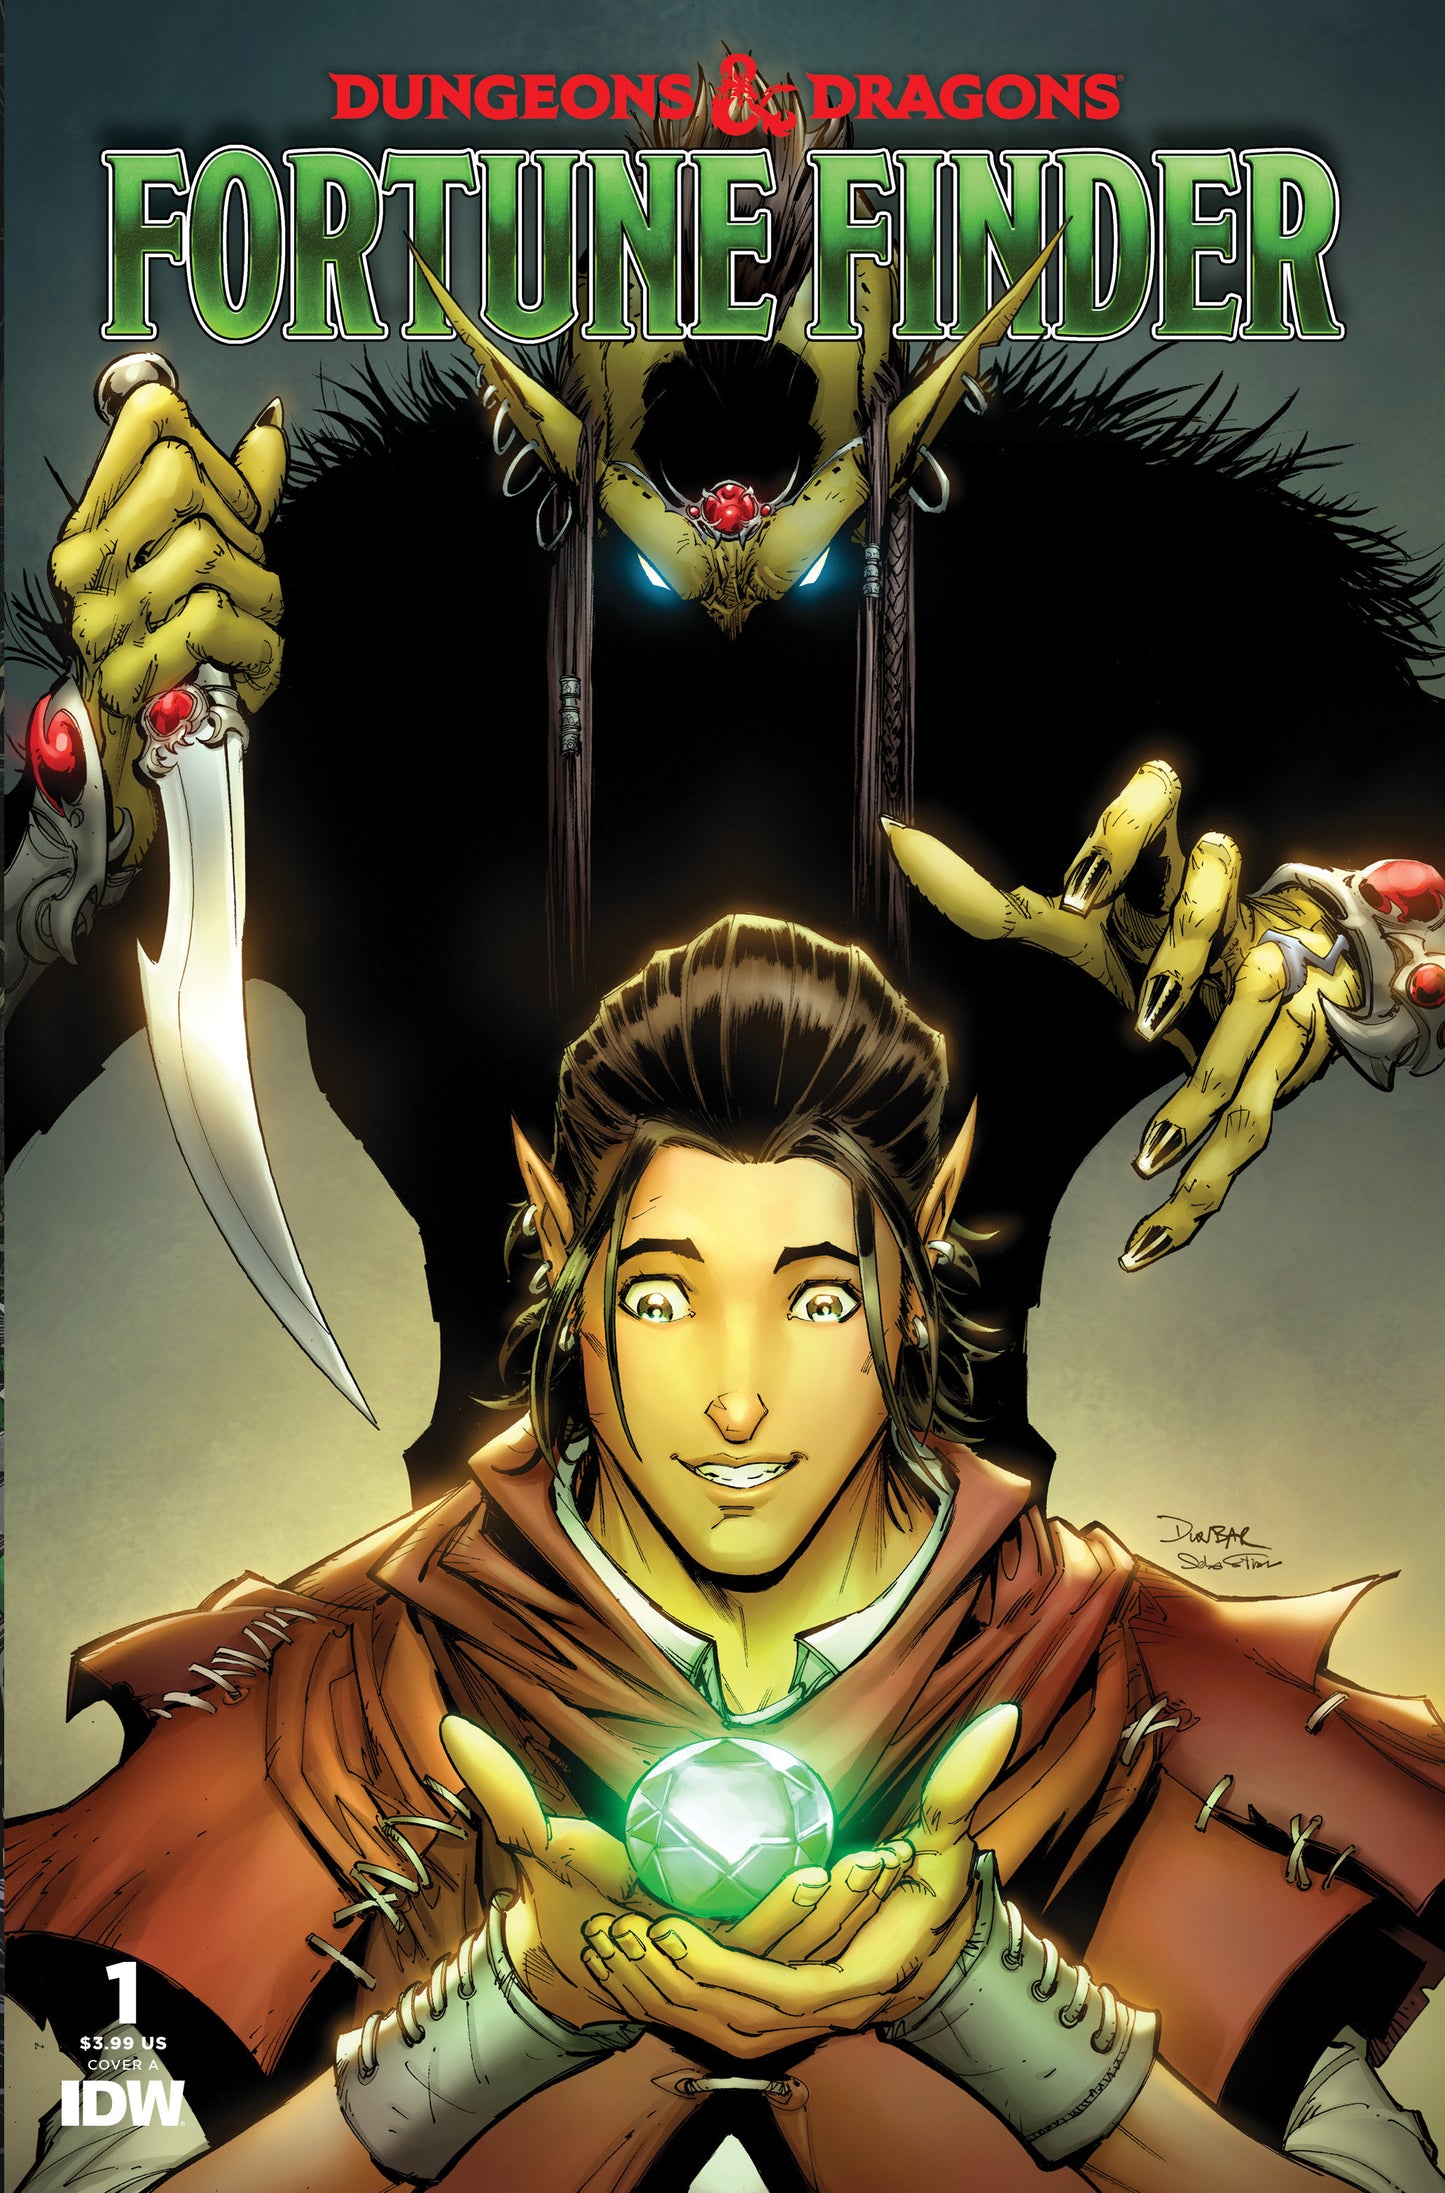 Dungeons & Dragons: Fortune Finder #1 Cover A (Dunbar)